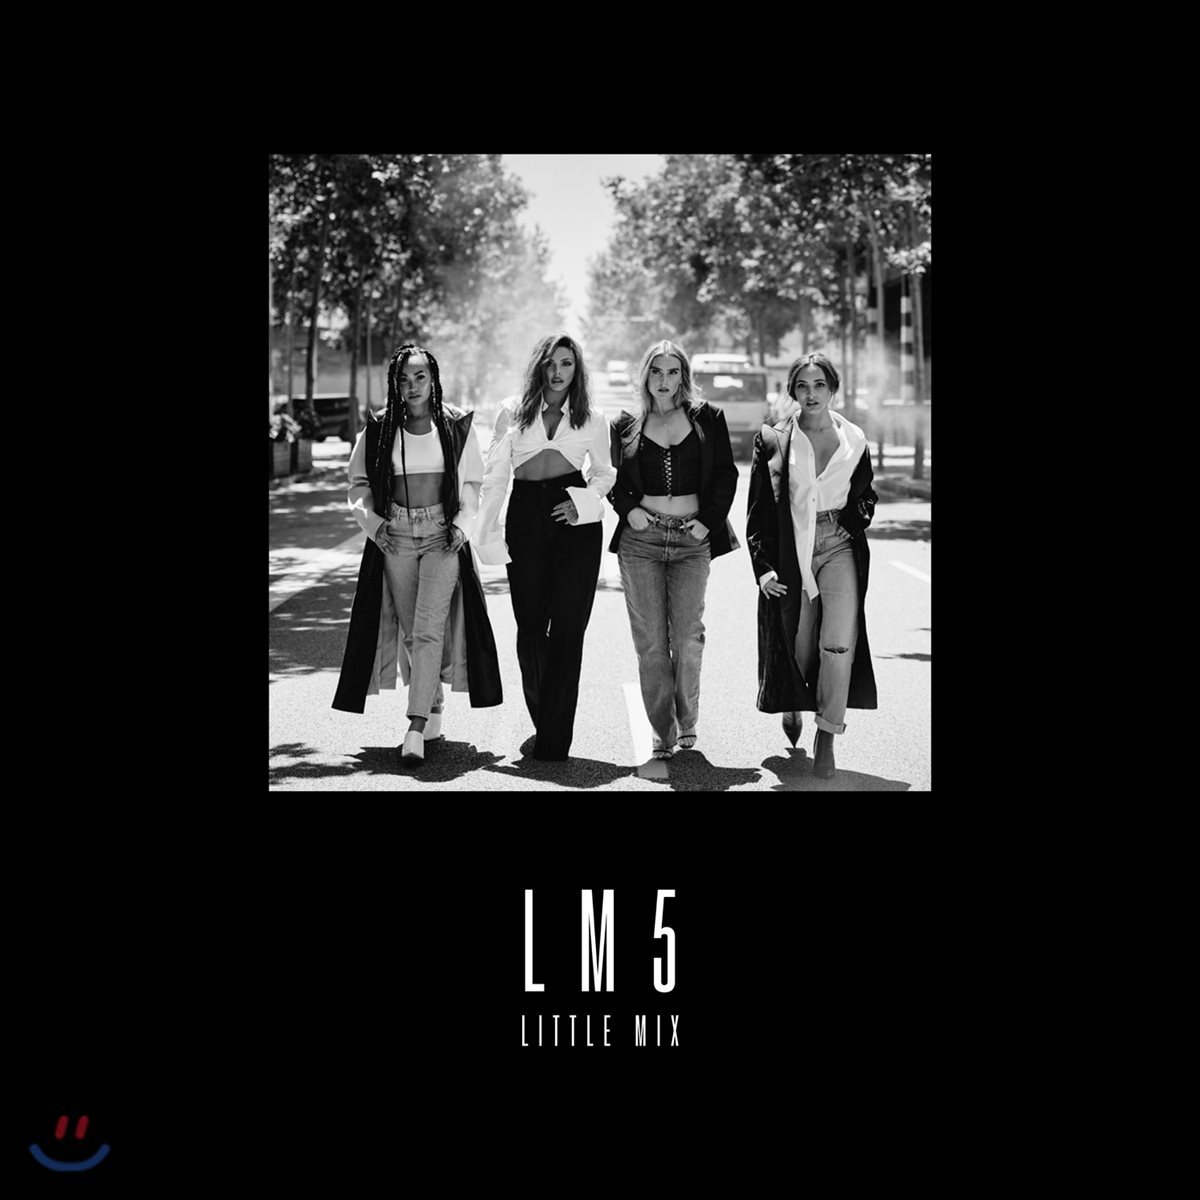 Little Mix (리틀 믹스) - LM5 (Deluxe Edition) 정규 5집